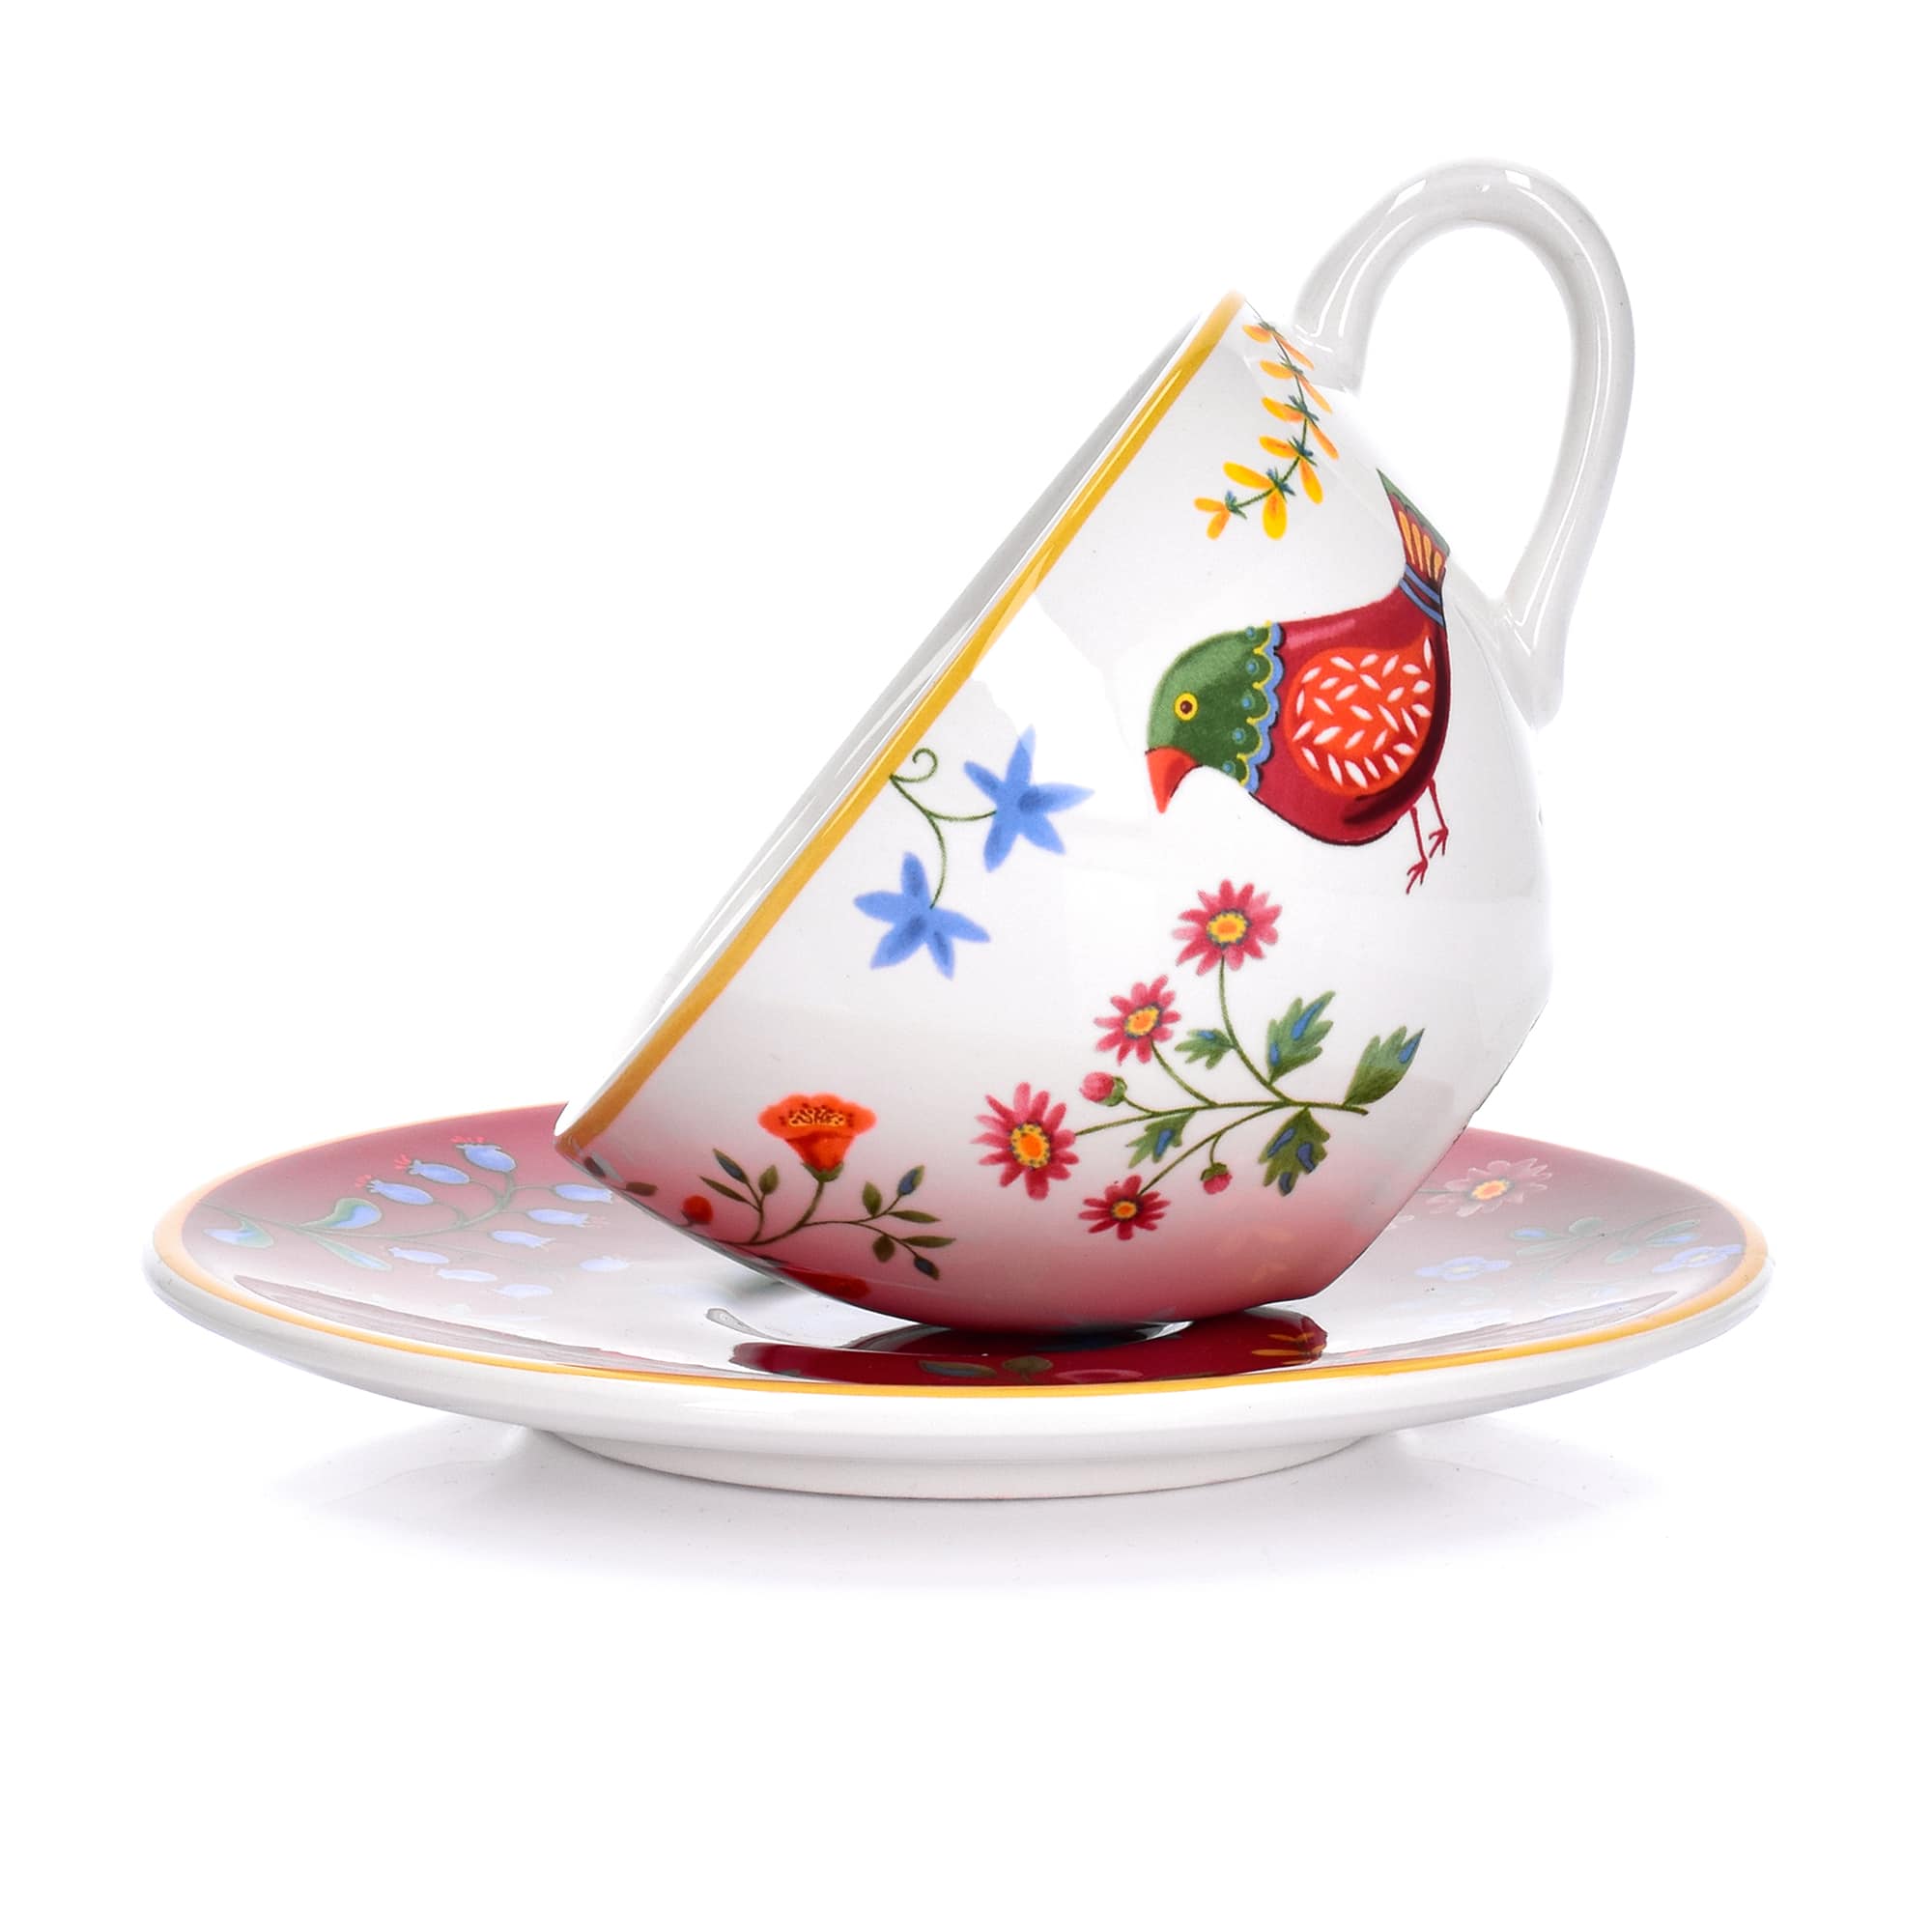 10-OZ Folk Art Inspired Ceramic Cup and Saucer